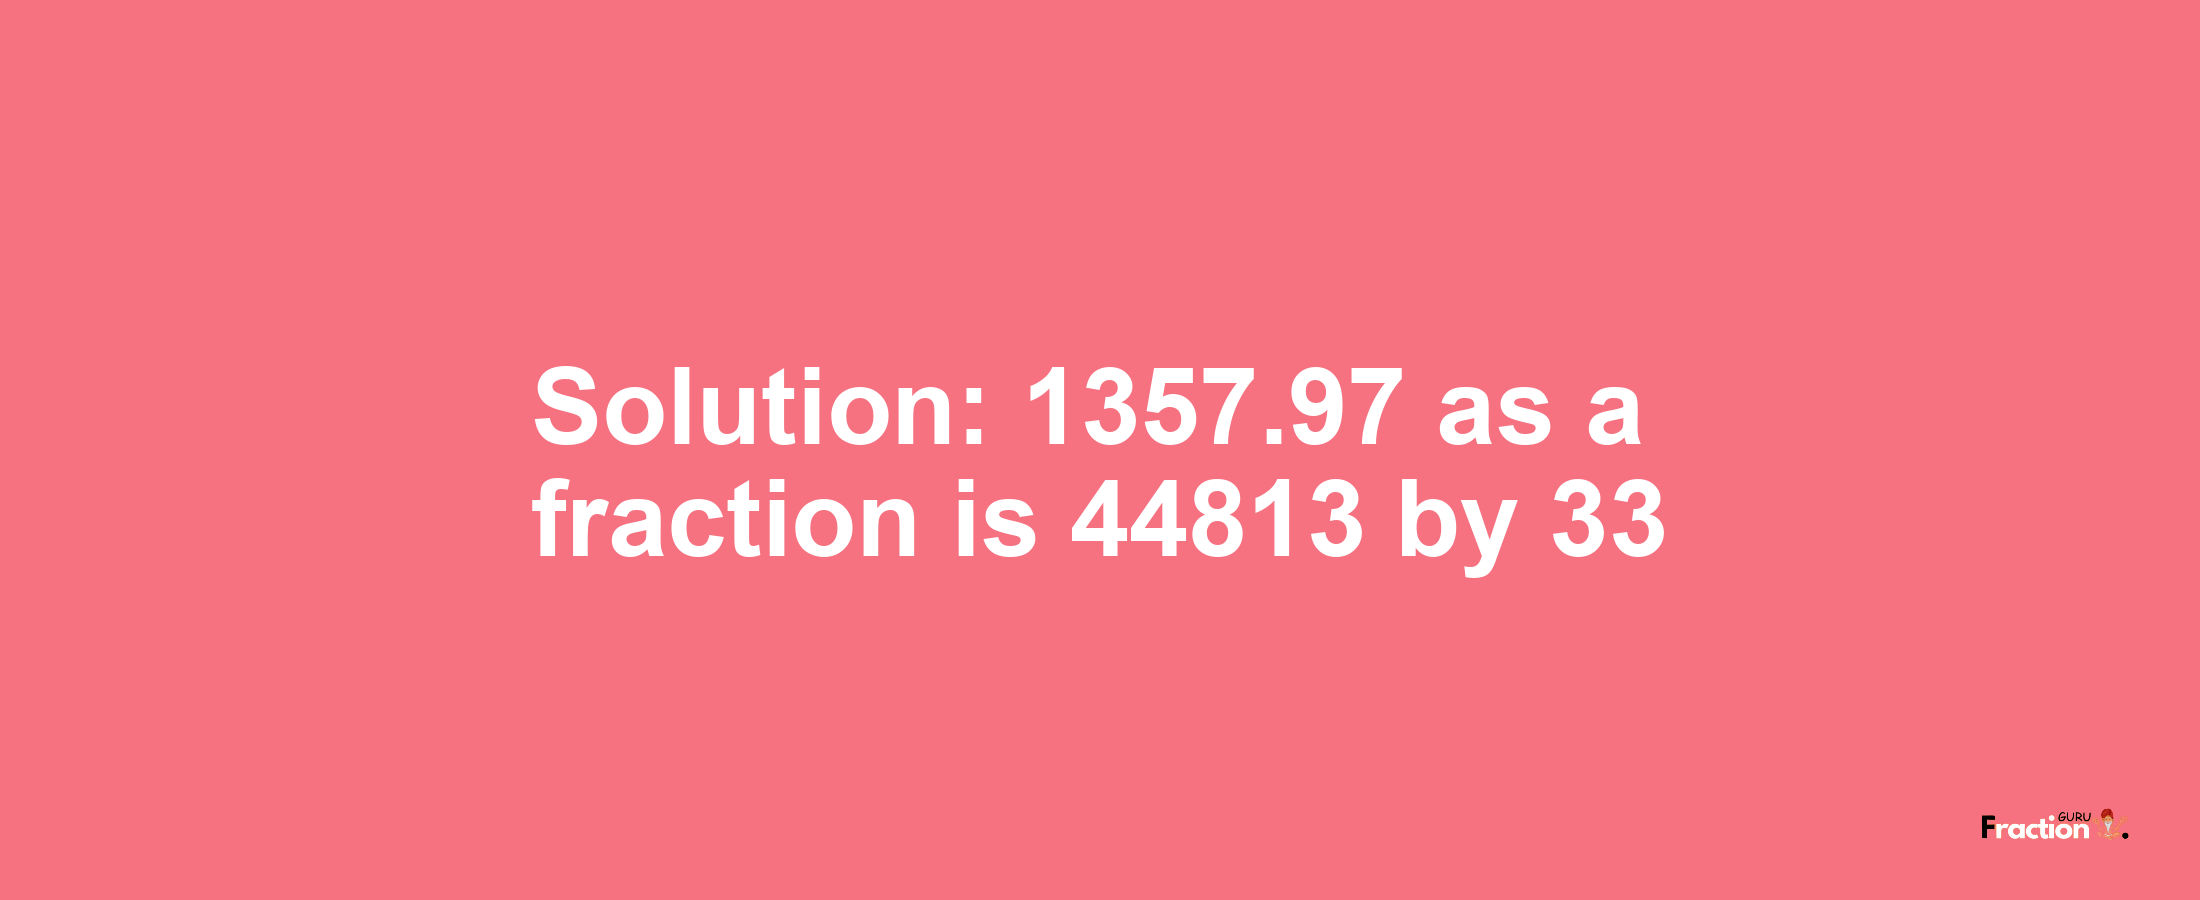 Solution:1357.97 as a fraction is 44813/33